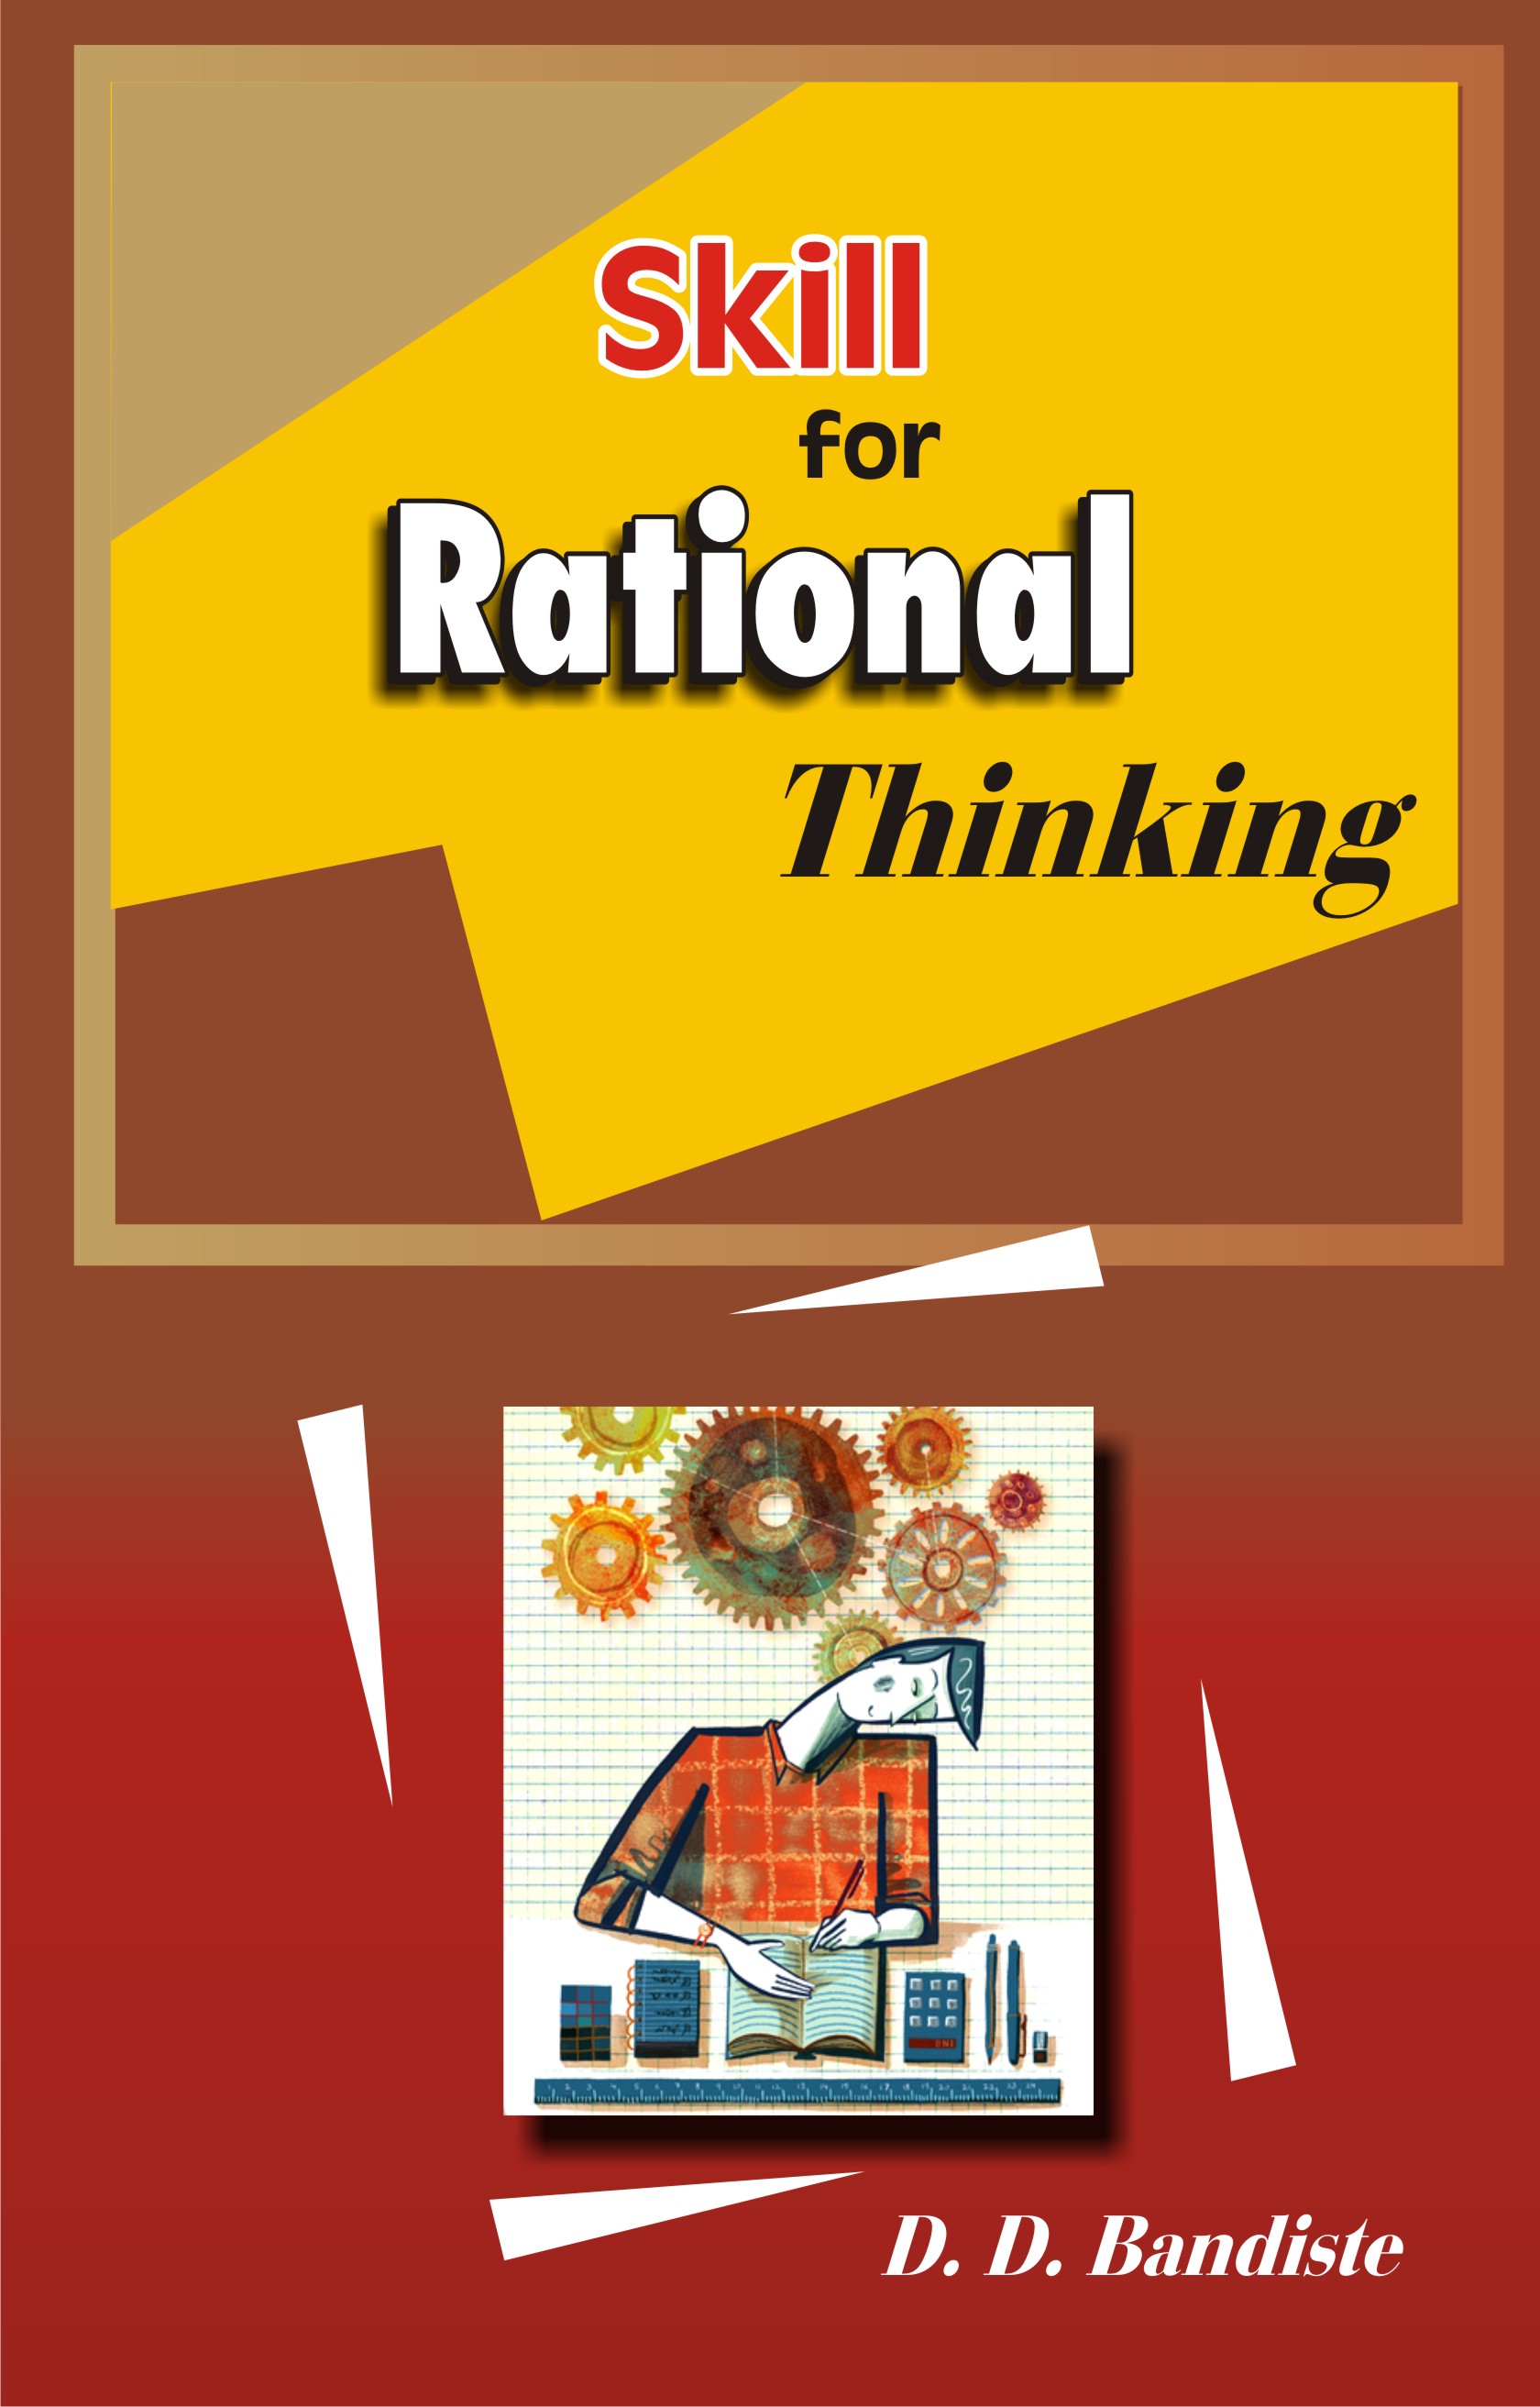 SKILL-FOR-RATIONAL-THINKING